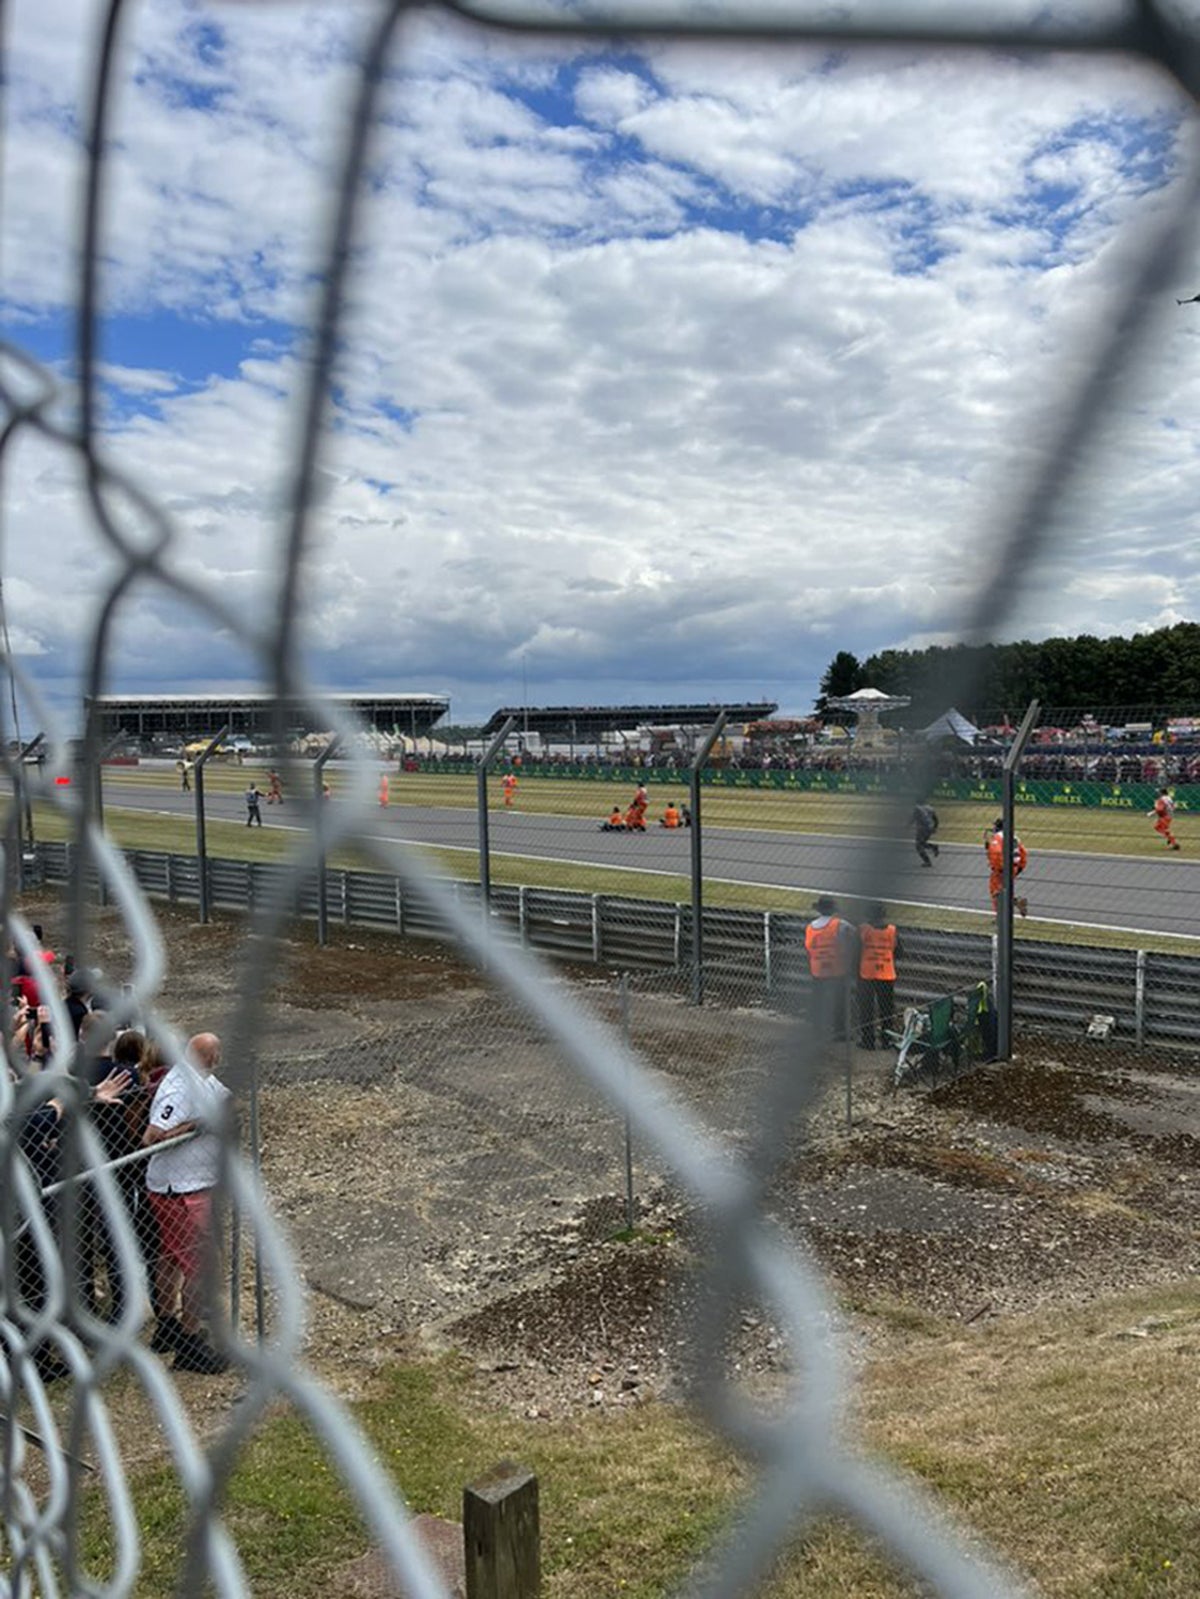 British Grand Prix protesters remain in custody after ‘irresponsible’ track invasion